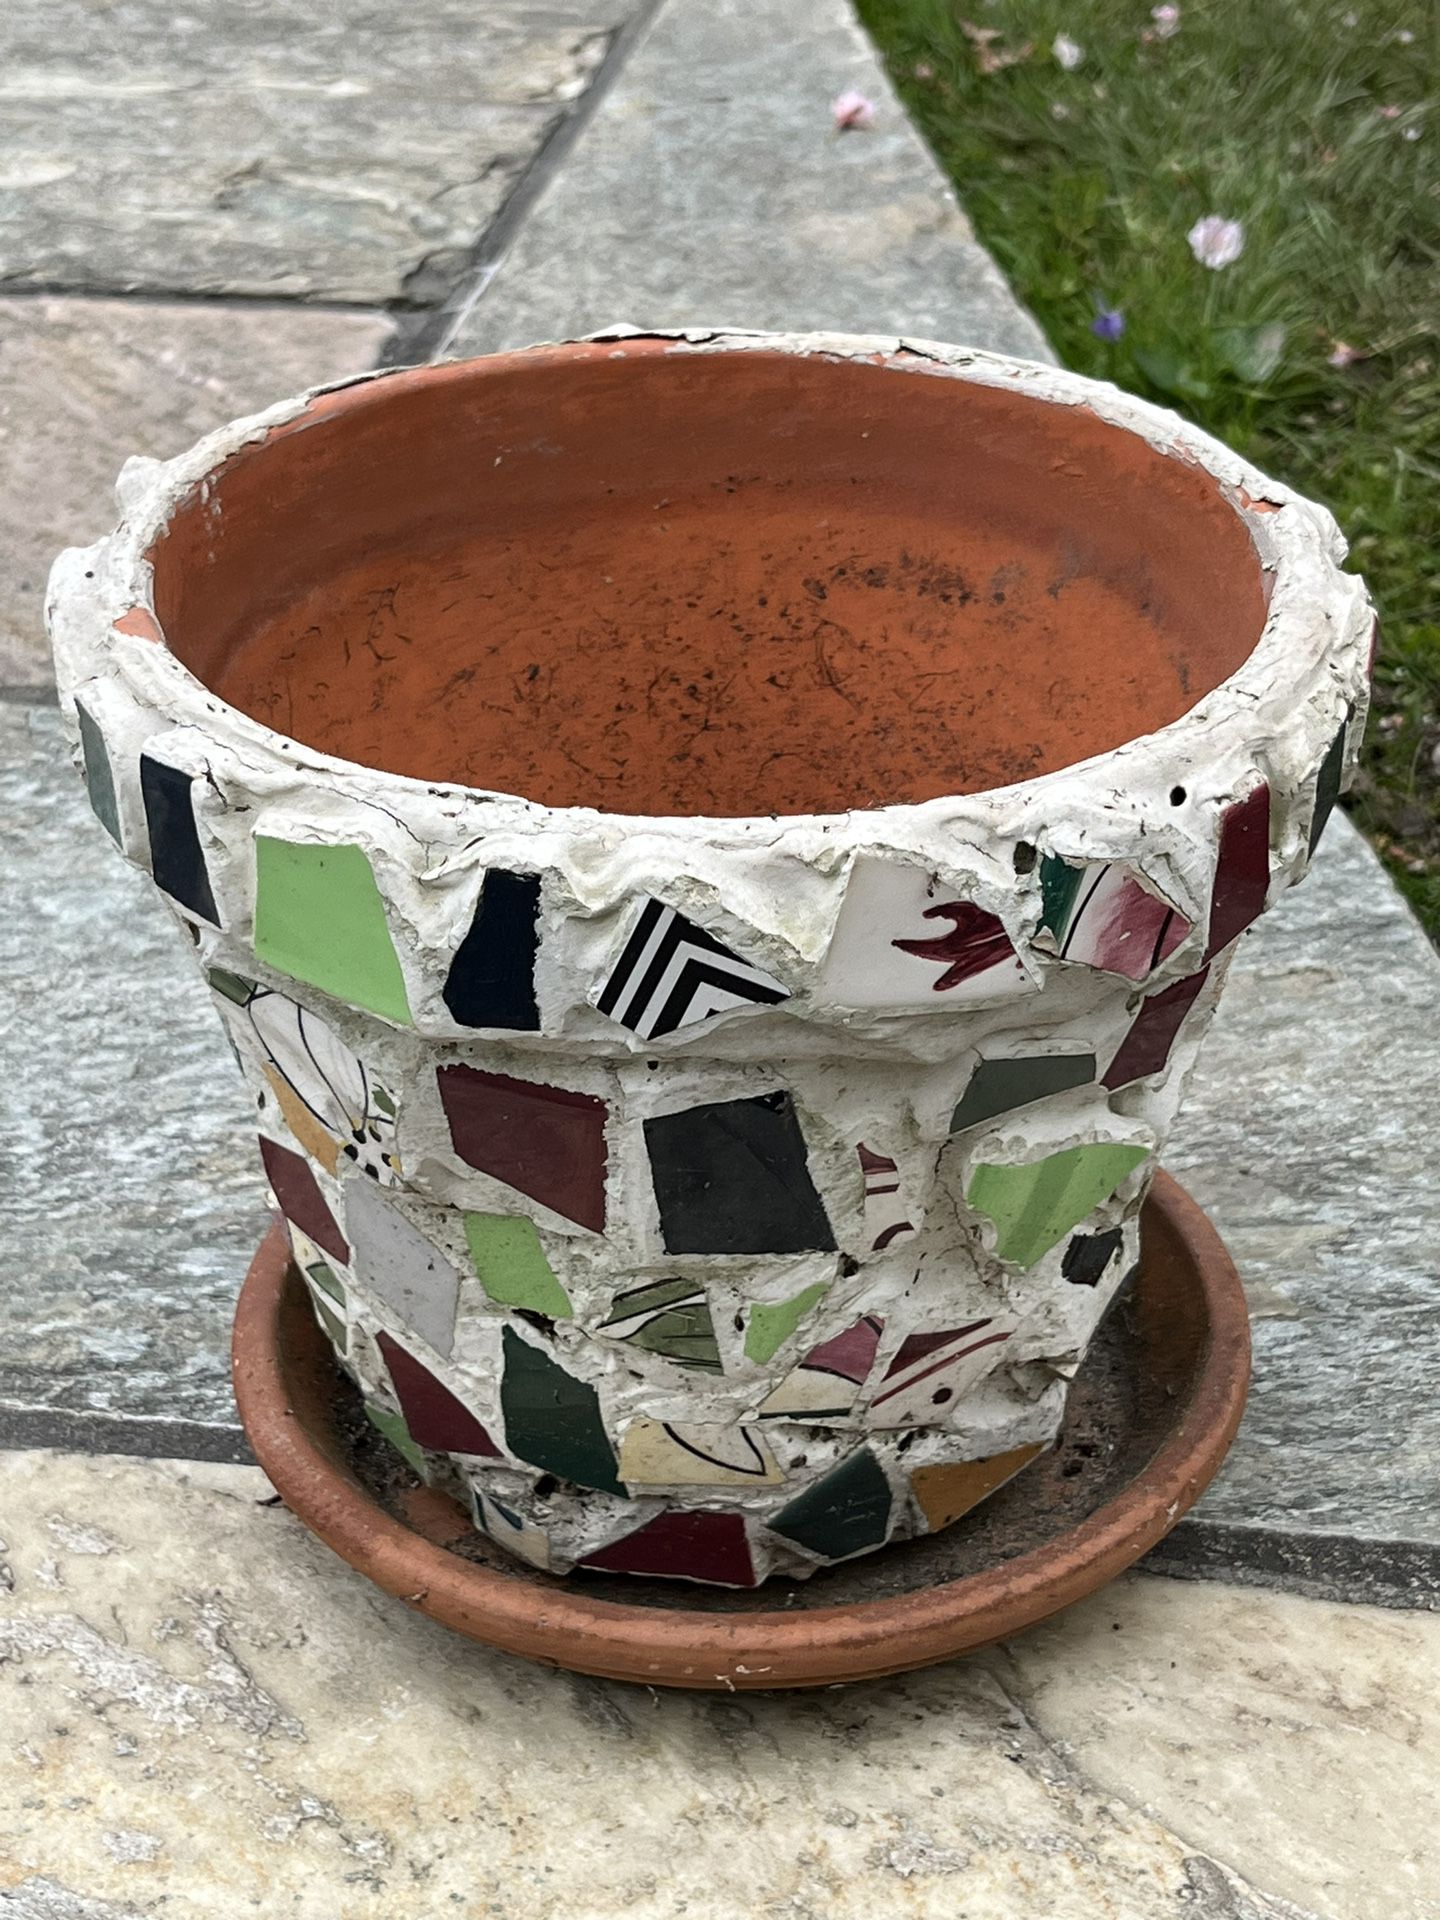 Handcrafted Mosaic Tile Planter